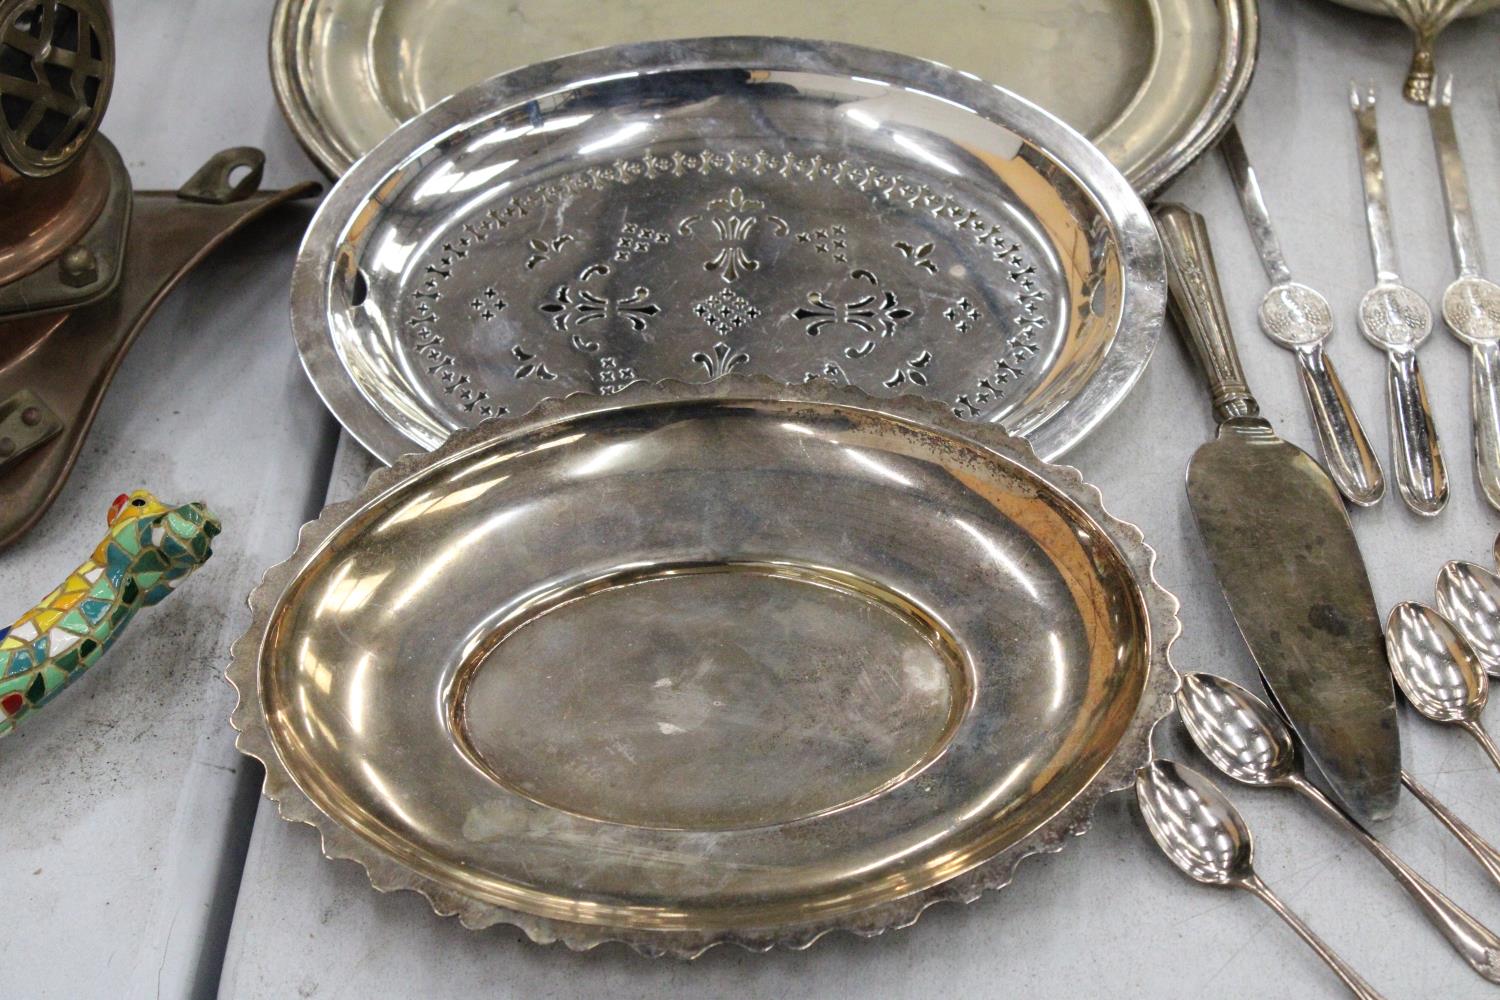 A MIXED LOT OF SILVER PLATE TO INCLUDE PLATES, SPOONS, GRAVY BOWL, SUGAR CASTER ETC - Image 2 of 6